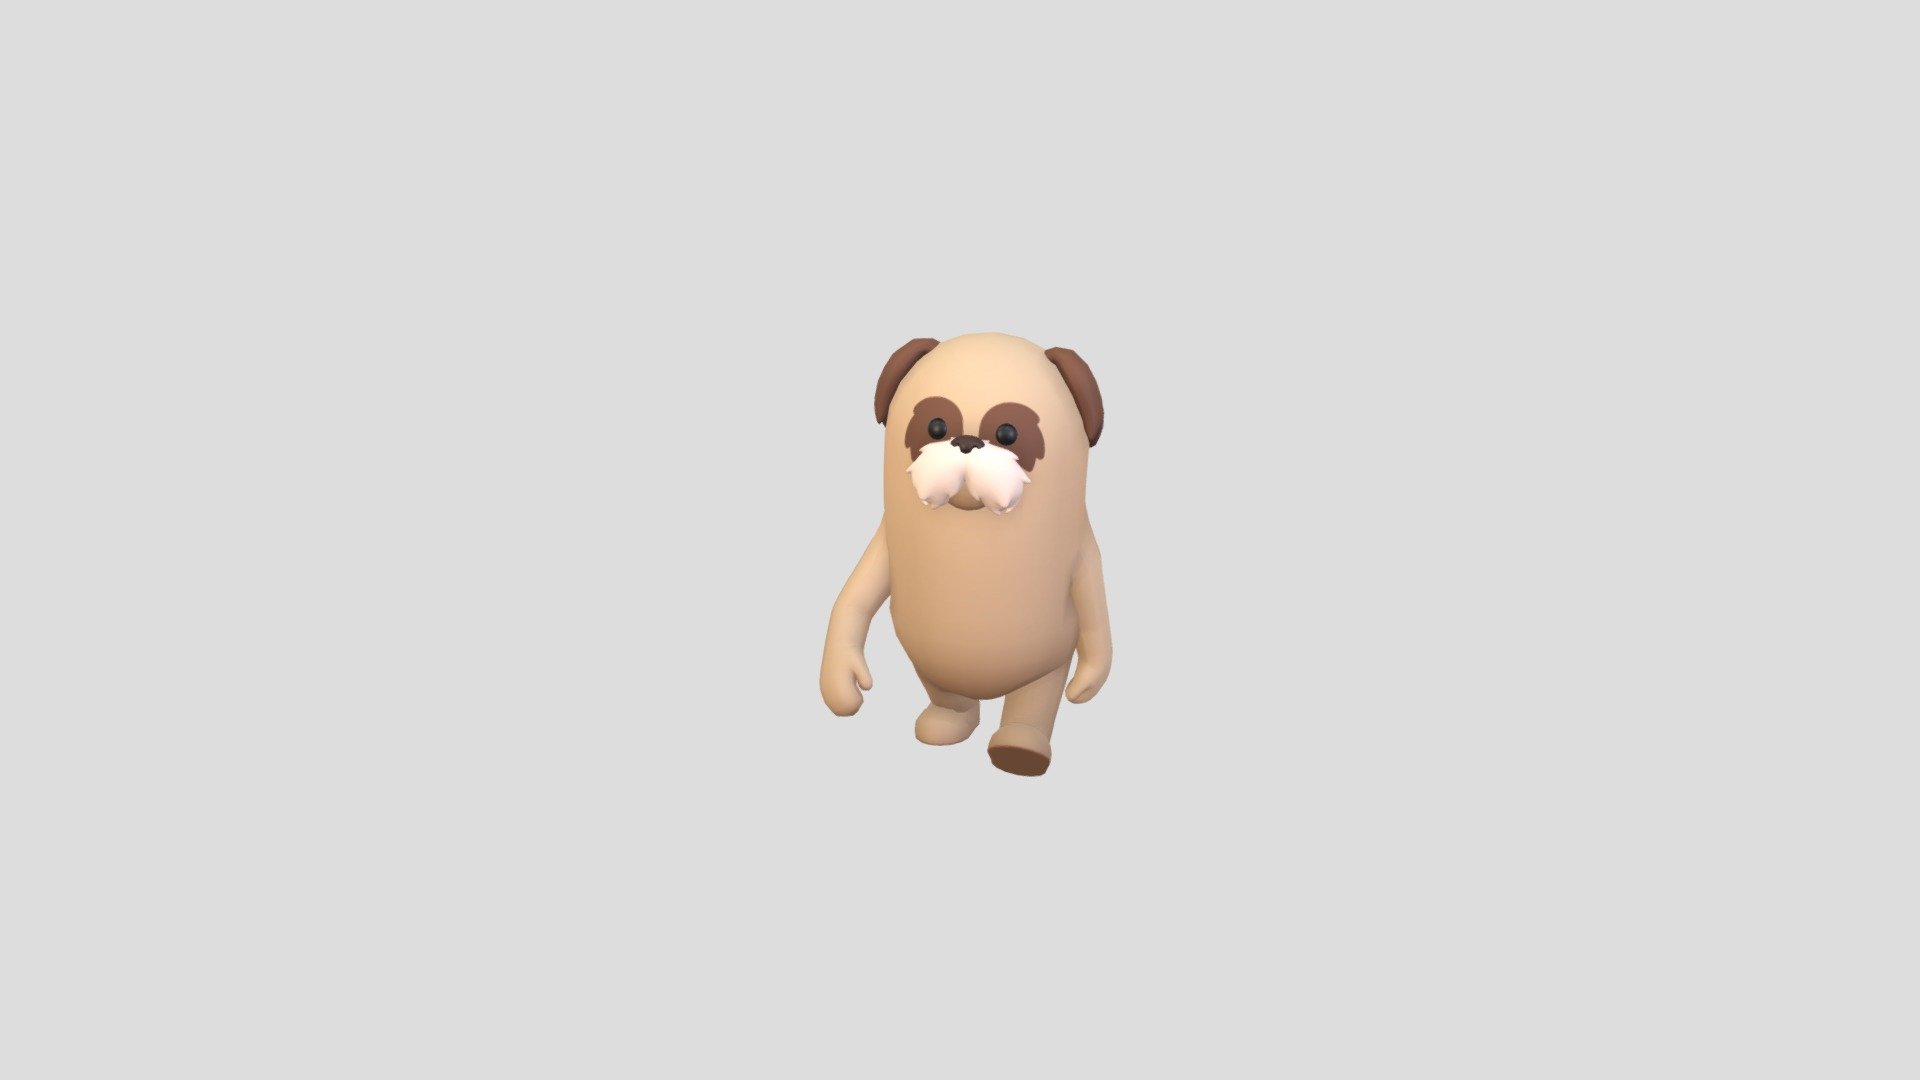 Rigged ShihTzu Dog Character 3d model.      
    


File Formats      
 
- 3ds max 2023 (Rigged With CAT)  
 
- FBX  (Rigged) 
 
- OBJ  (NoRig) 
    


Clean topology    

Body Rigged  

No Facial Rig  or Blendshapes 

No Animations  

Non-overlapping unwrapped UVs        
 


PNG texture               

2048x2048                


- Base Color                        

- Normal                            

- Roughness                         



4,044 polygons                          

4,114 vertexs                          
 - Rigged ShihTzu Dog Character - Buy Royalty Free 3D model by bariacg 3d model